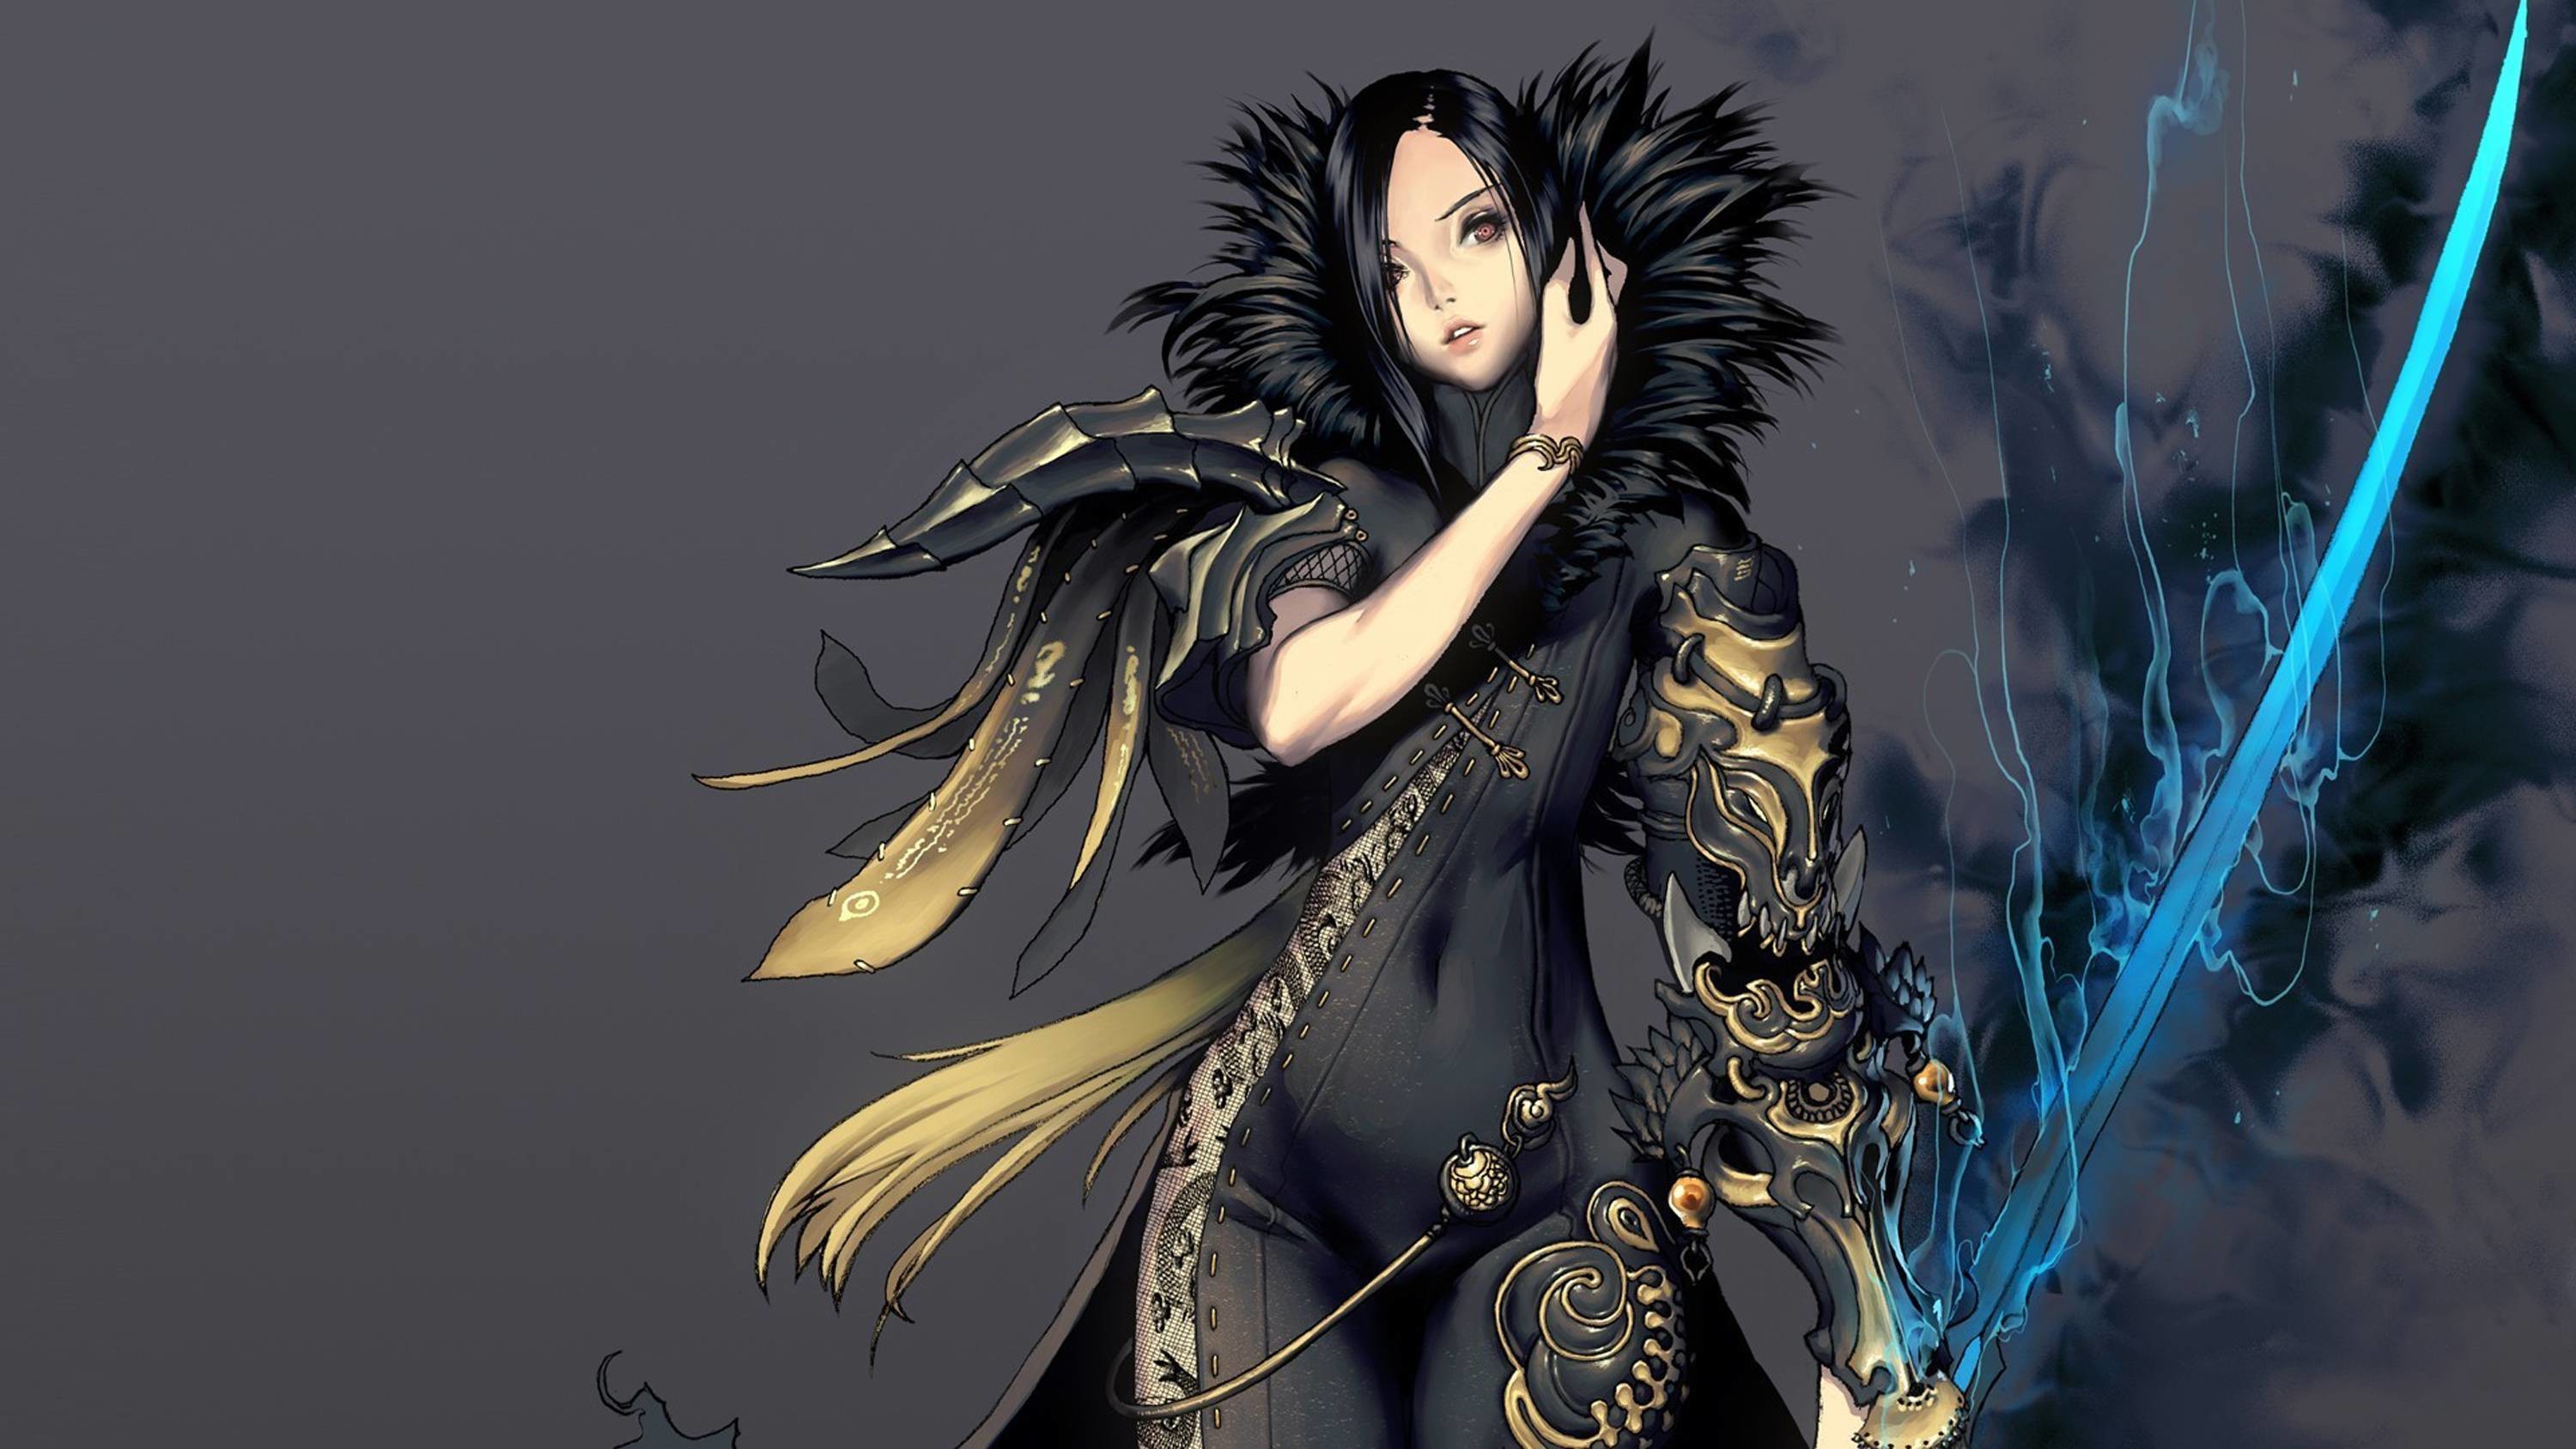 3000x1688 Blade And Soul Computer Wallpapers, Desktop Backgrounds  .